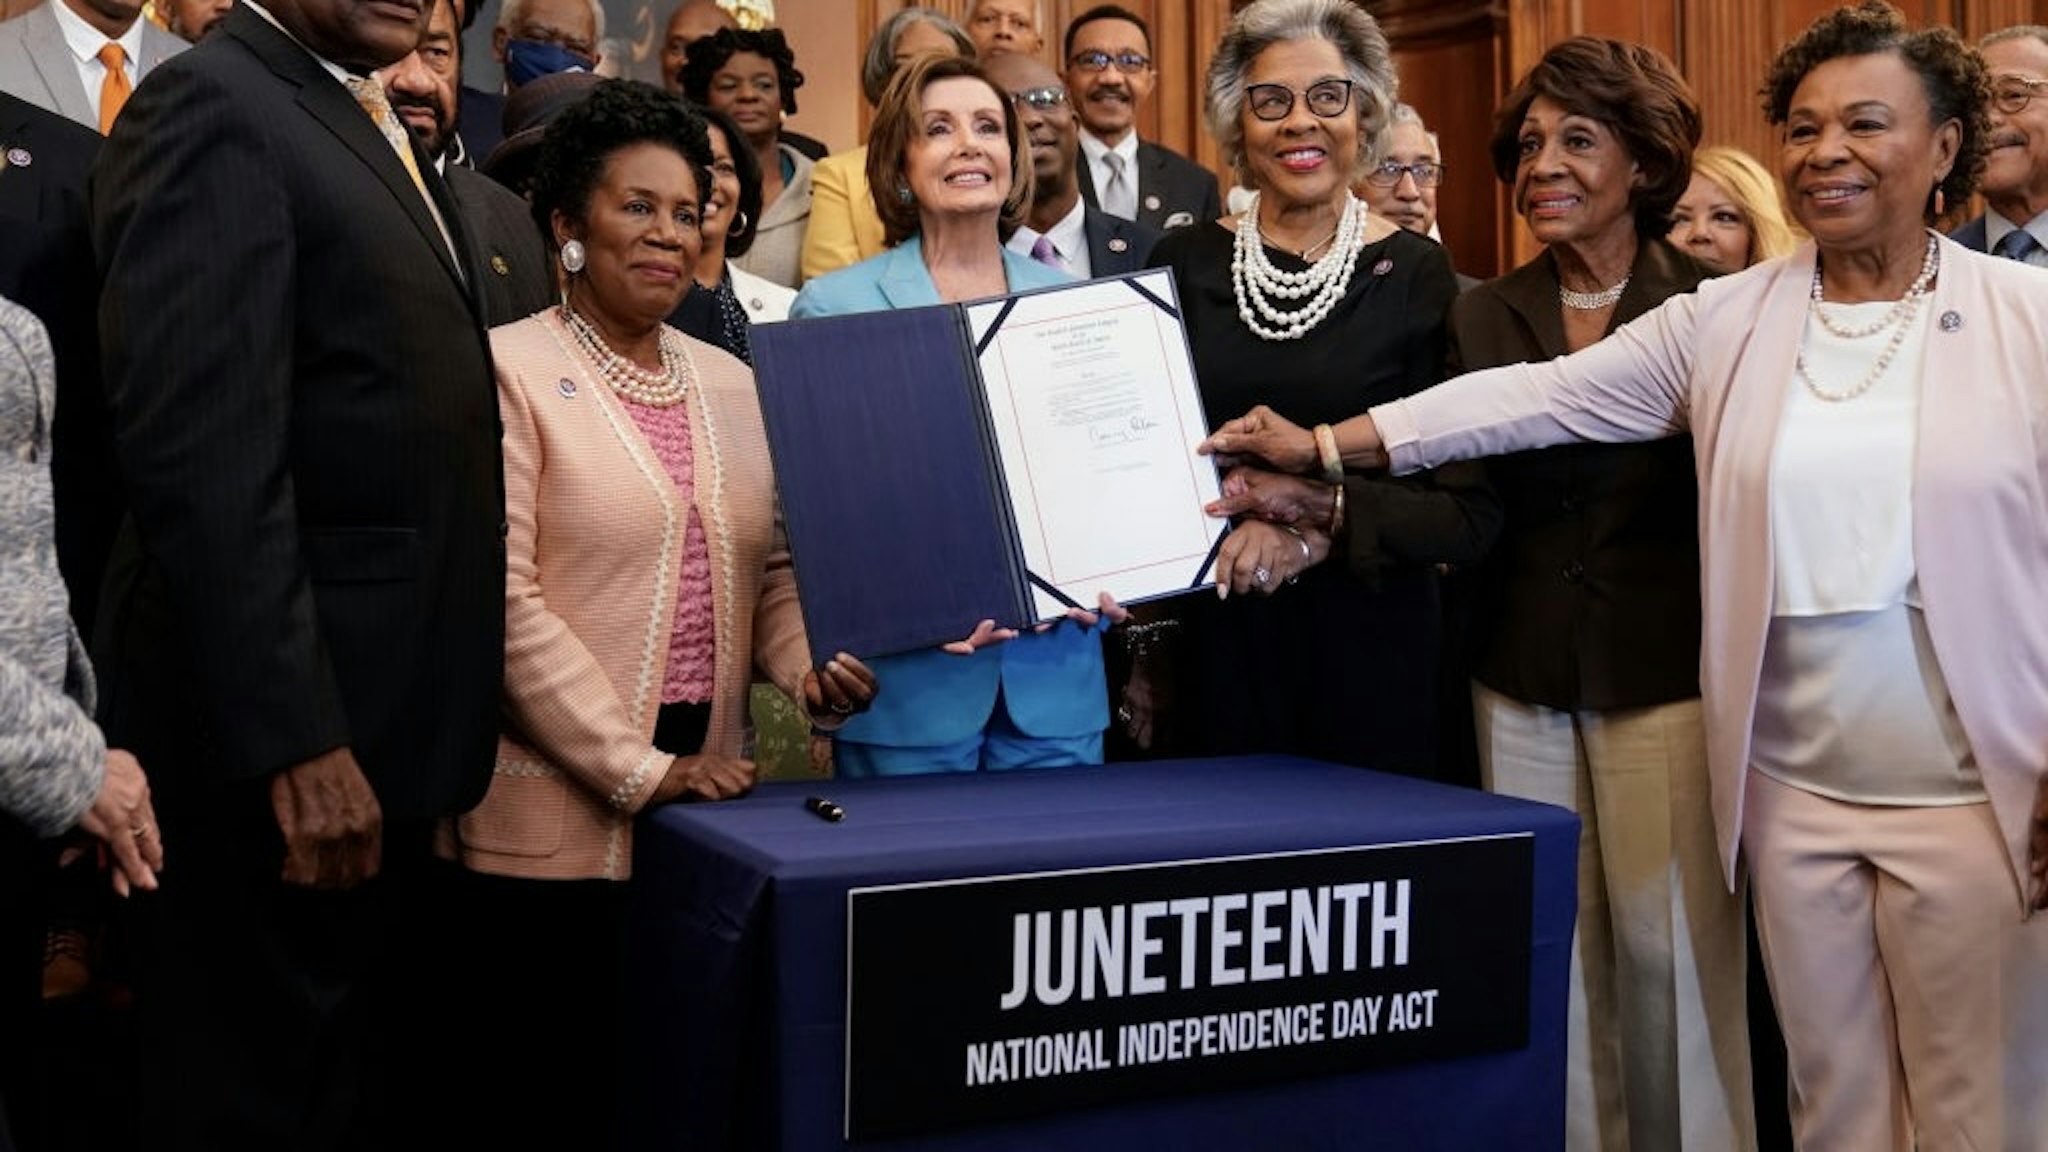 Speaker Pelosi Holds Bill Enrollment Event For Juneteenth National Independence Day Act WASHINGTON, DC - JUNE 17: Speaker of the House Nancy Pelosi (D-CA) holds a bill enrollment signing ceremony for the Juneteenth National Independence Day Act as members of the Congressional Black Caucus hold the bill on June 17, 2021 on Capitol Hill in Washington, DC. Juneteenth, celebrated on June 19th, commemorates the of the end of slavery in the United States and will be celebrated as a national holiday. (Photo by Joshua Roberts/Getty Images) Joshua Roberts / Stringer via Getty Images